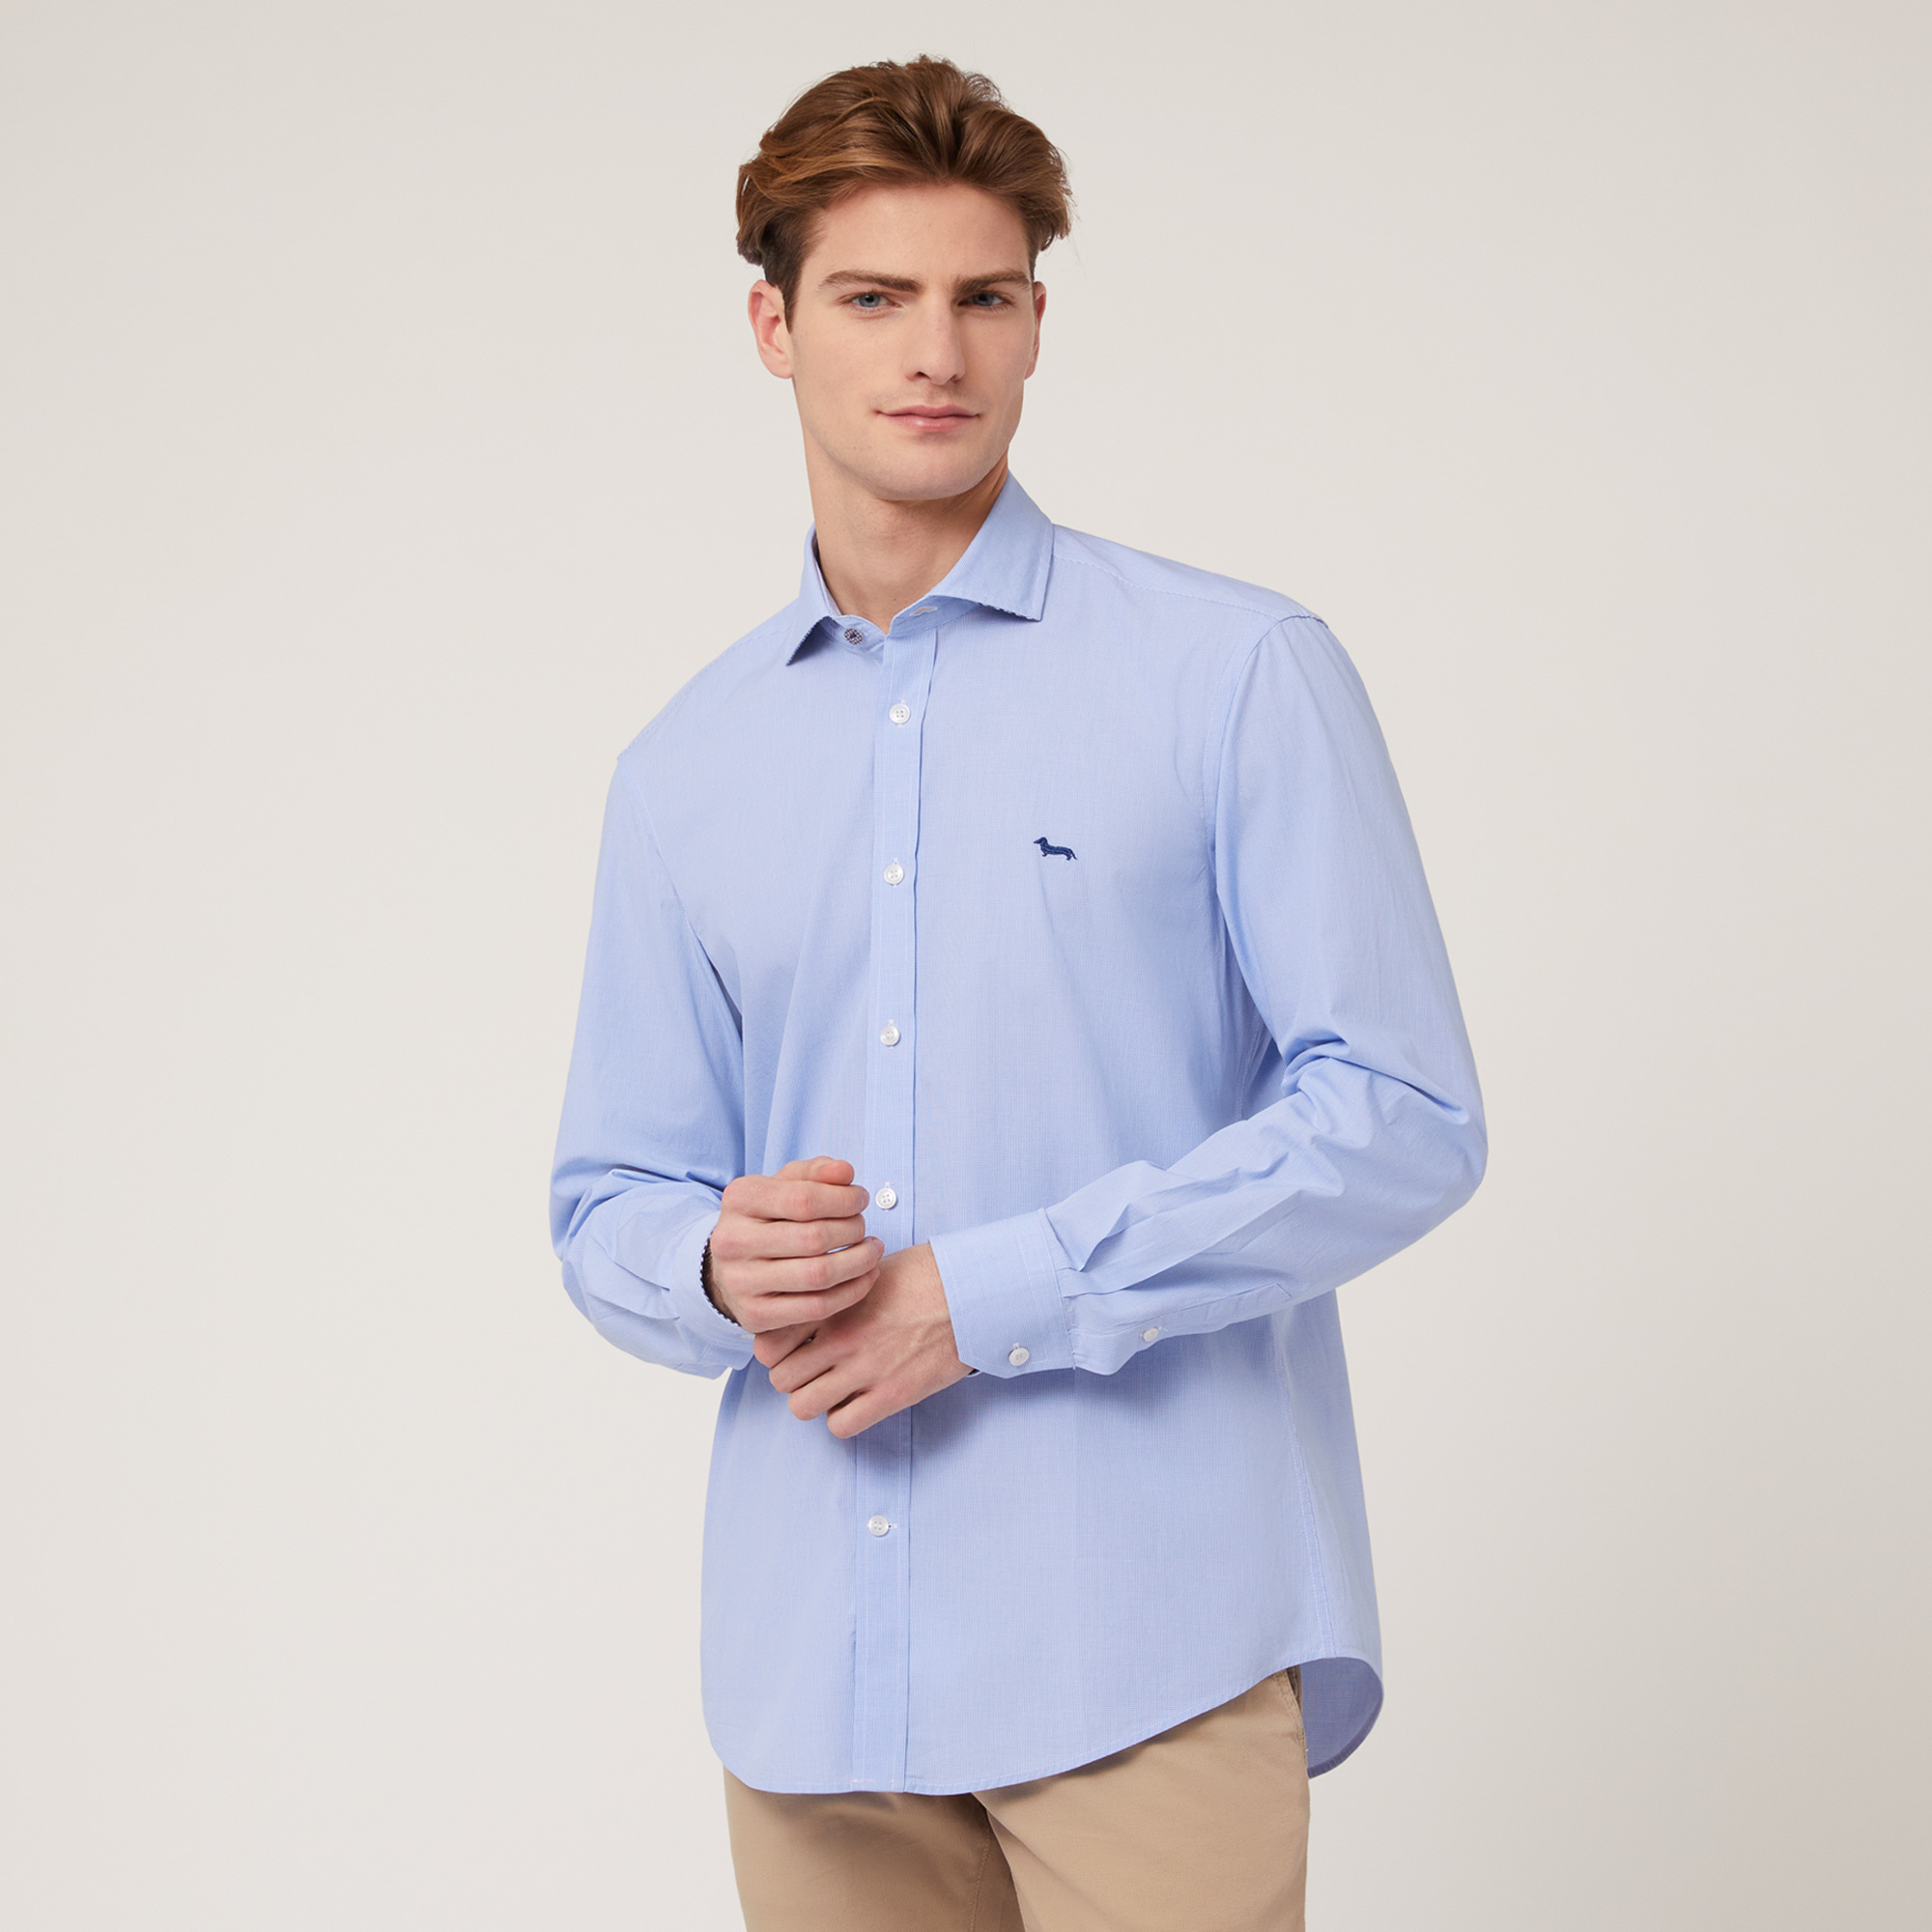 Organic Cotton Poplin Shirt with All-Over Micro Pattern, Sky Blue, large